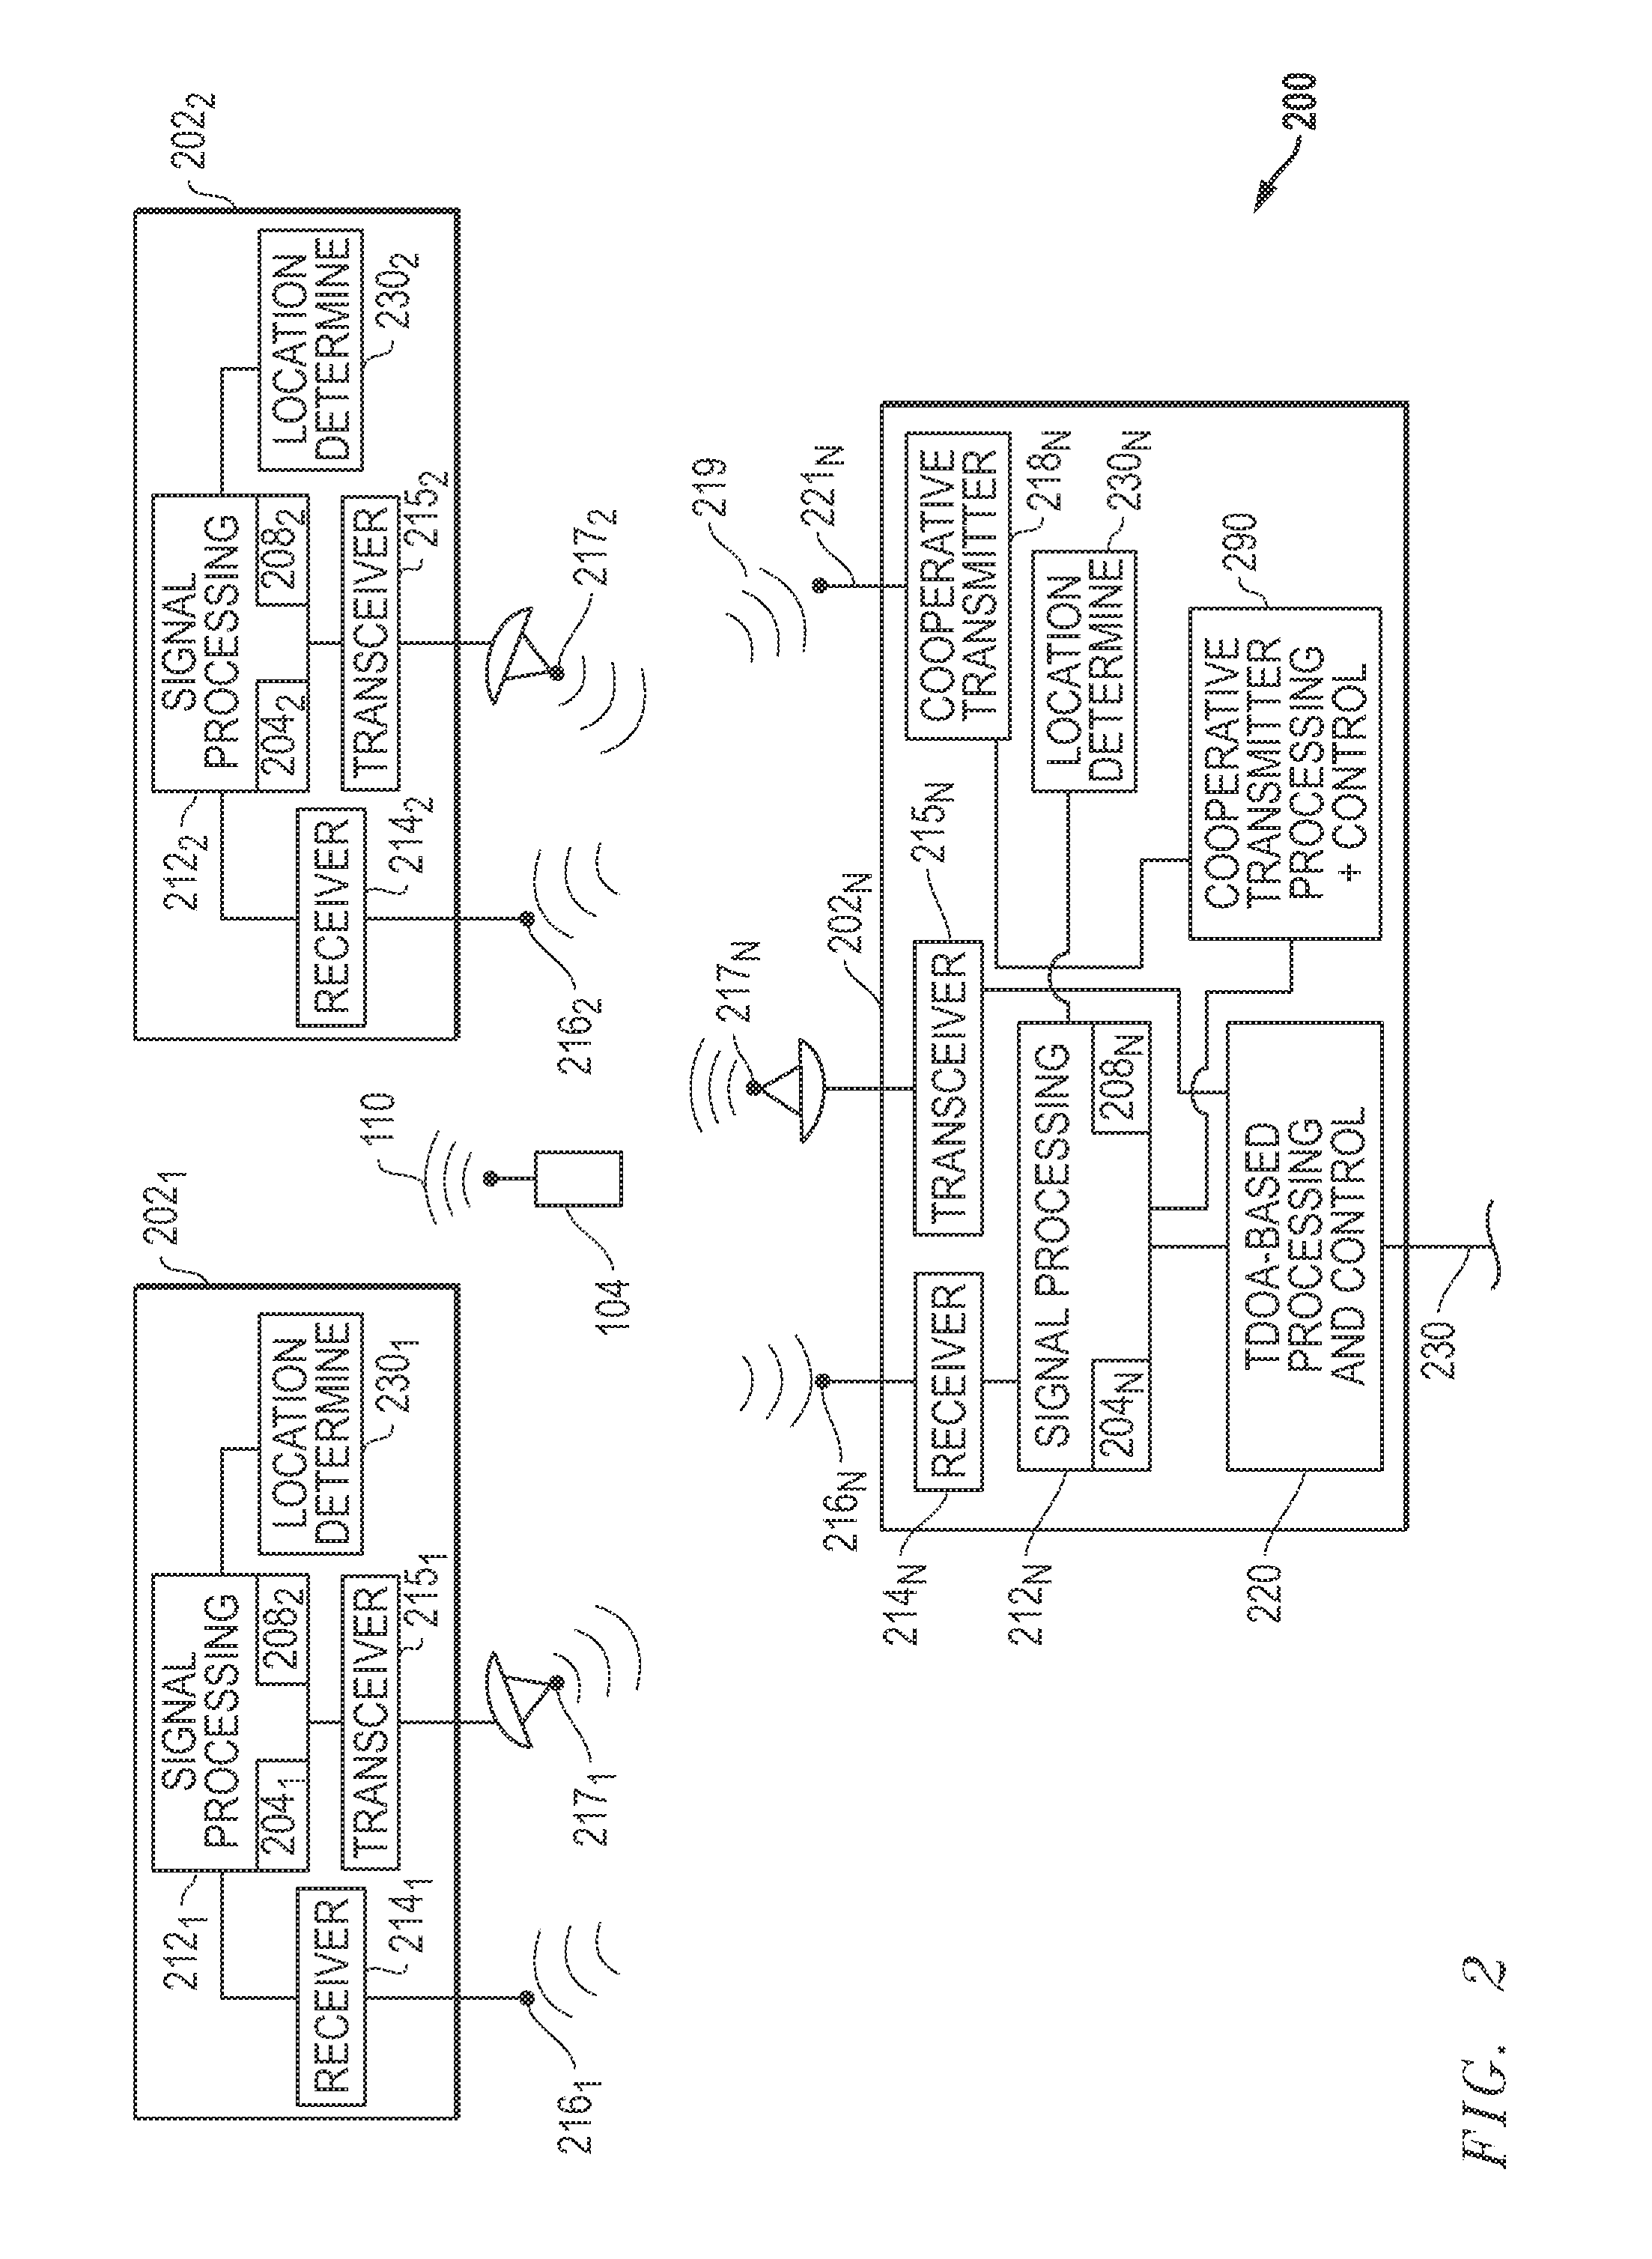 Cooperative systems and methods for tdoa-based emitter location